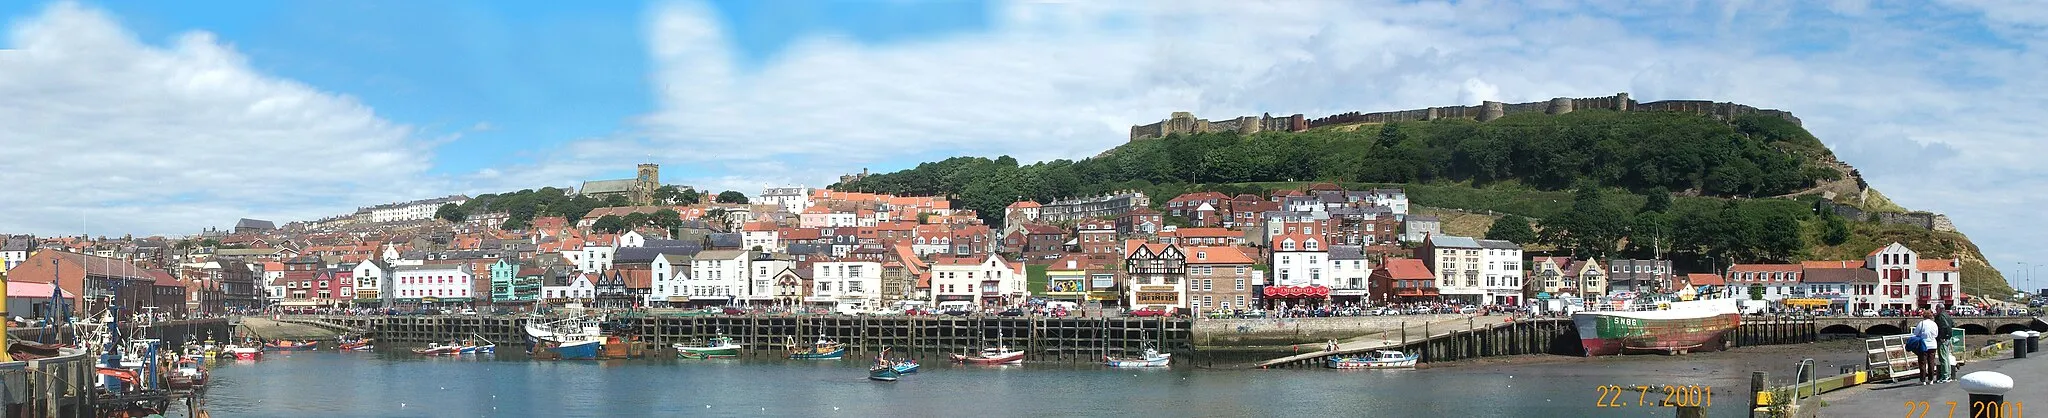 Photo showing: The South Bay at Scarborough, North Yorkshire, England. My Own Photograph, Stitched